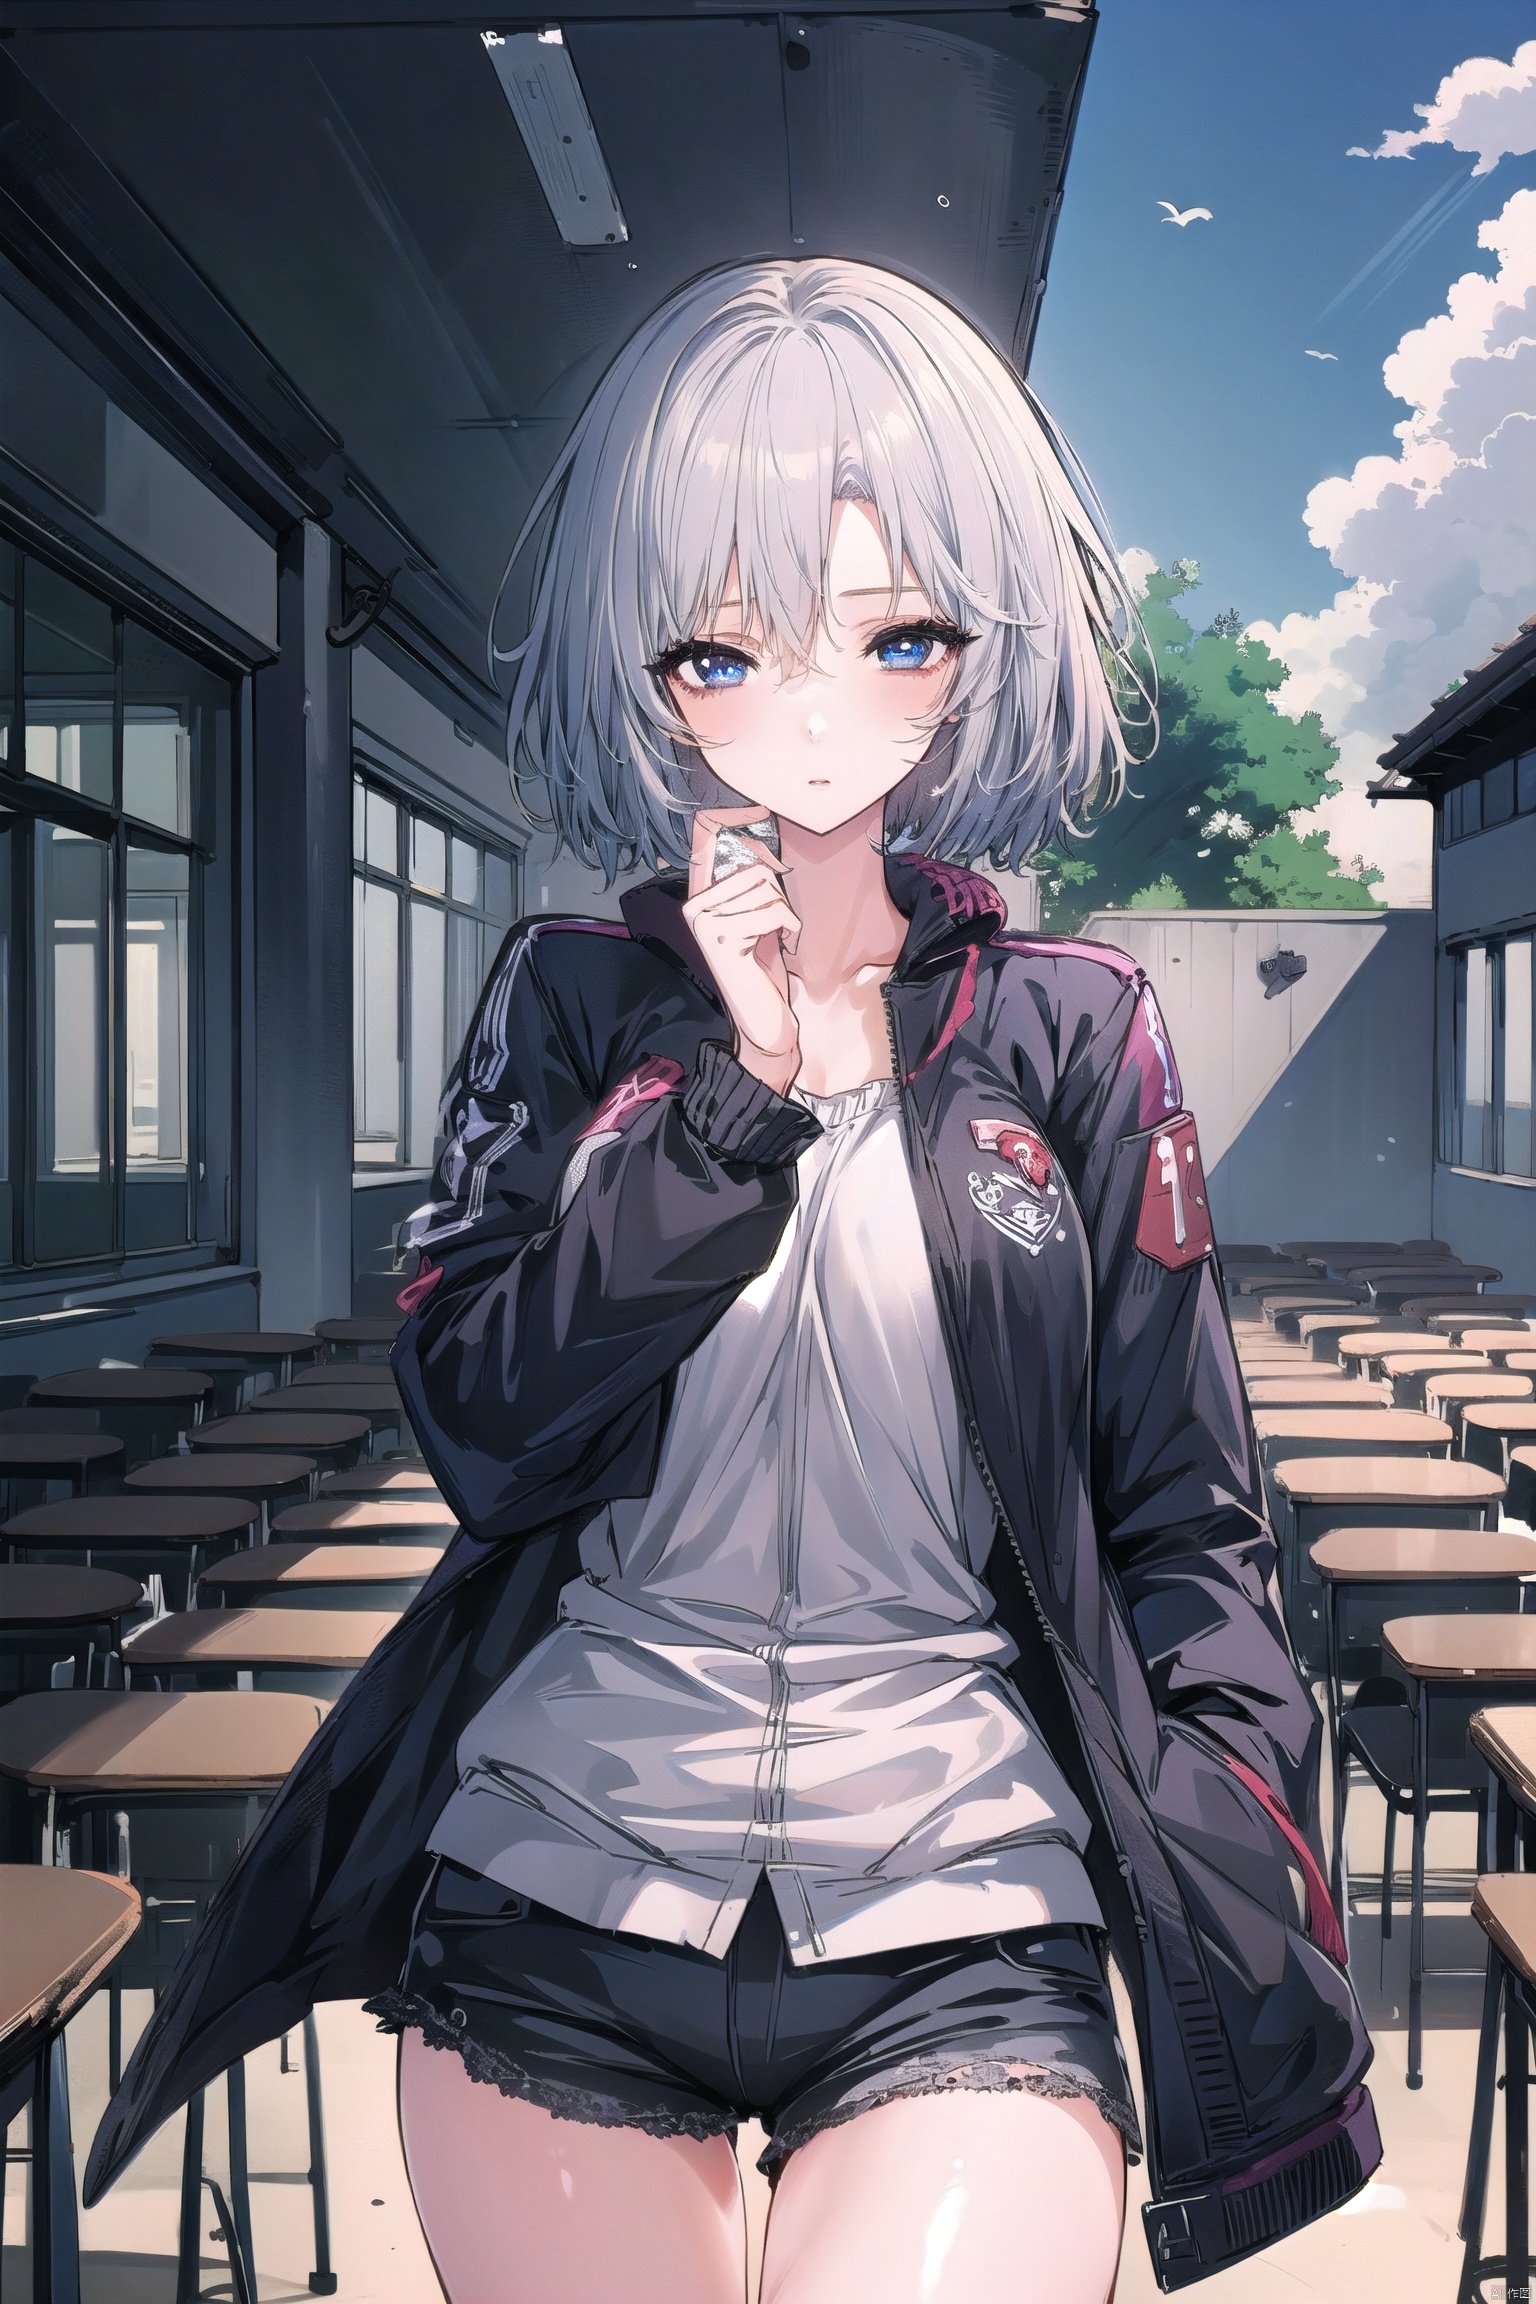 (((masterpiece))),best quality,illustration,(((1girl))),((cute anime face)),(beautiful detailed girl),expressionless,cold attitude,red pupils,short hair,white hair,(((beautiful detailed eyes))),jacket,cracked floor,damaged classroom,Tables and chairs in disarray,The residual eaves DuanBi,beautiful sky,cumulus,mouldy,floating,wind,Dead end machine,(broken robot),(Mechanical girl),realistic,masterpiece,best quality